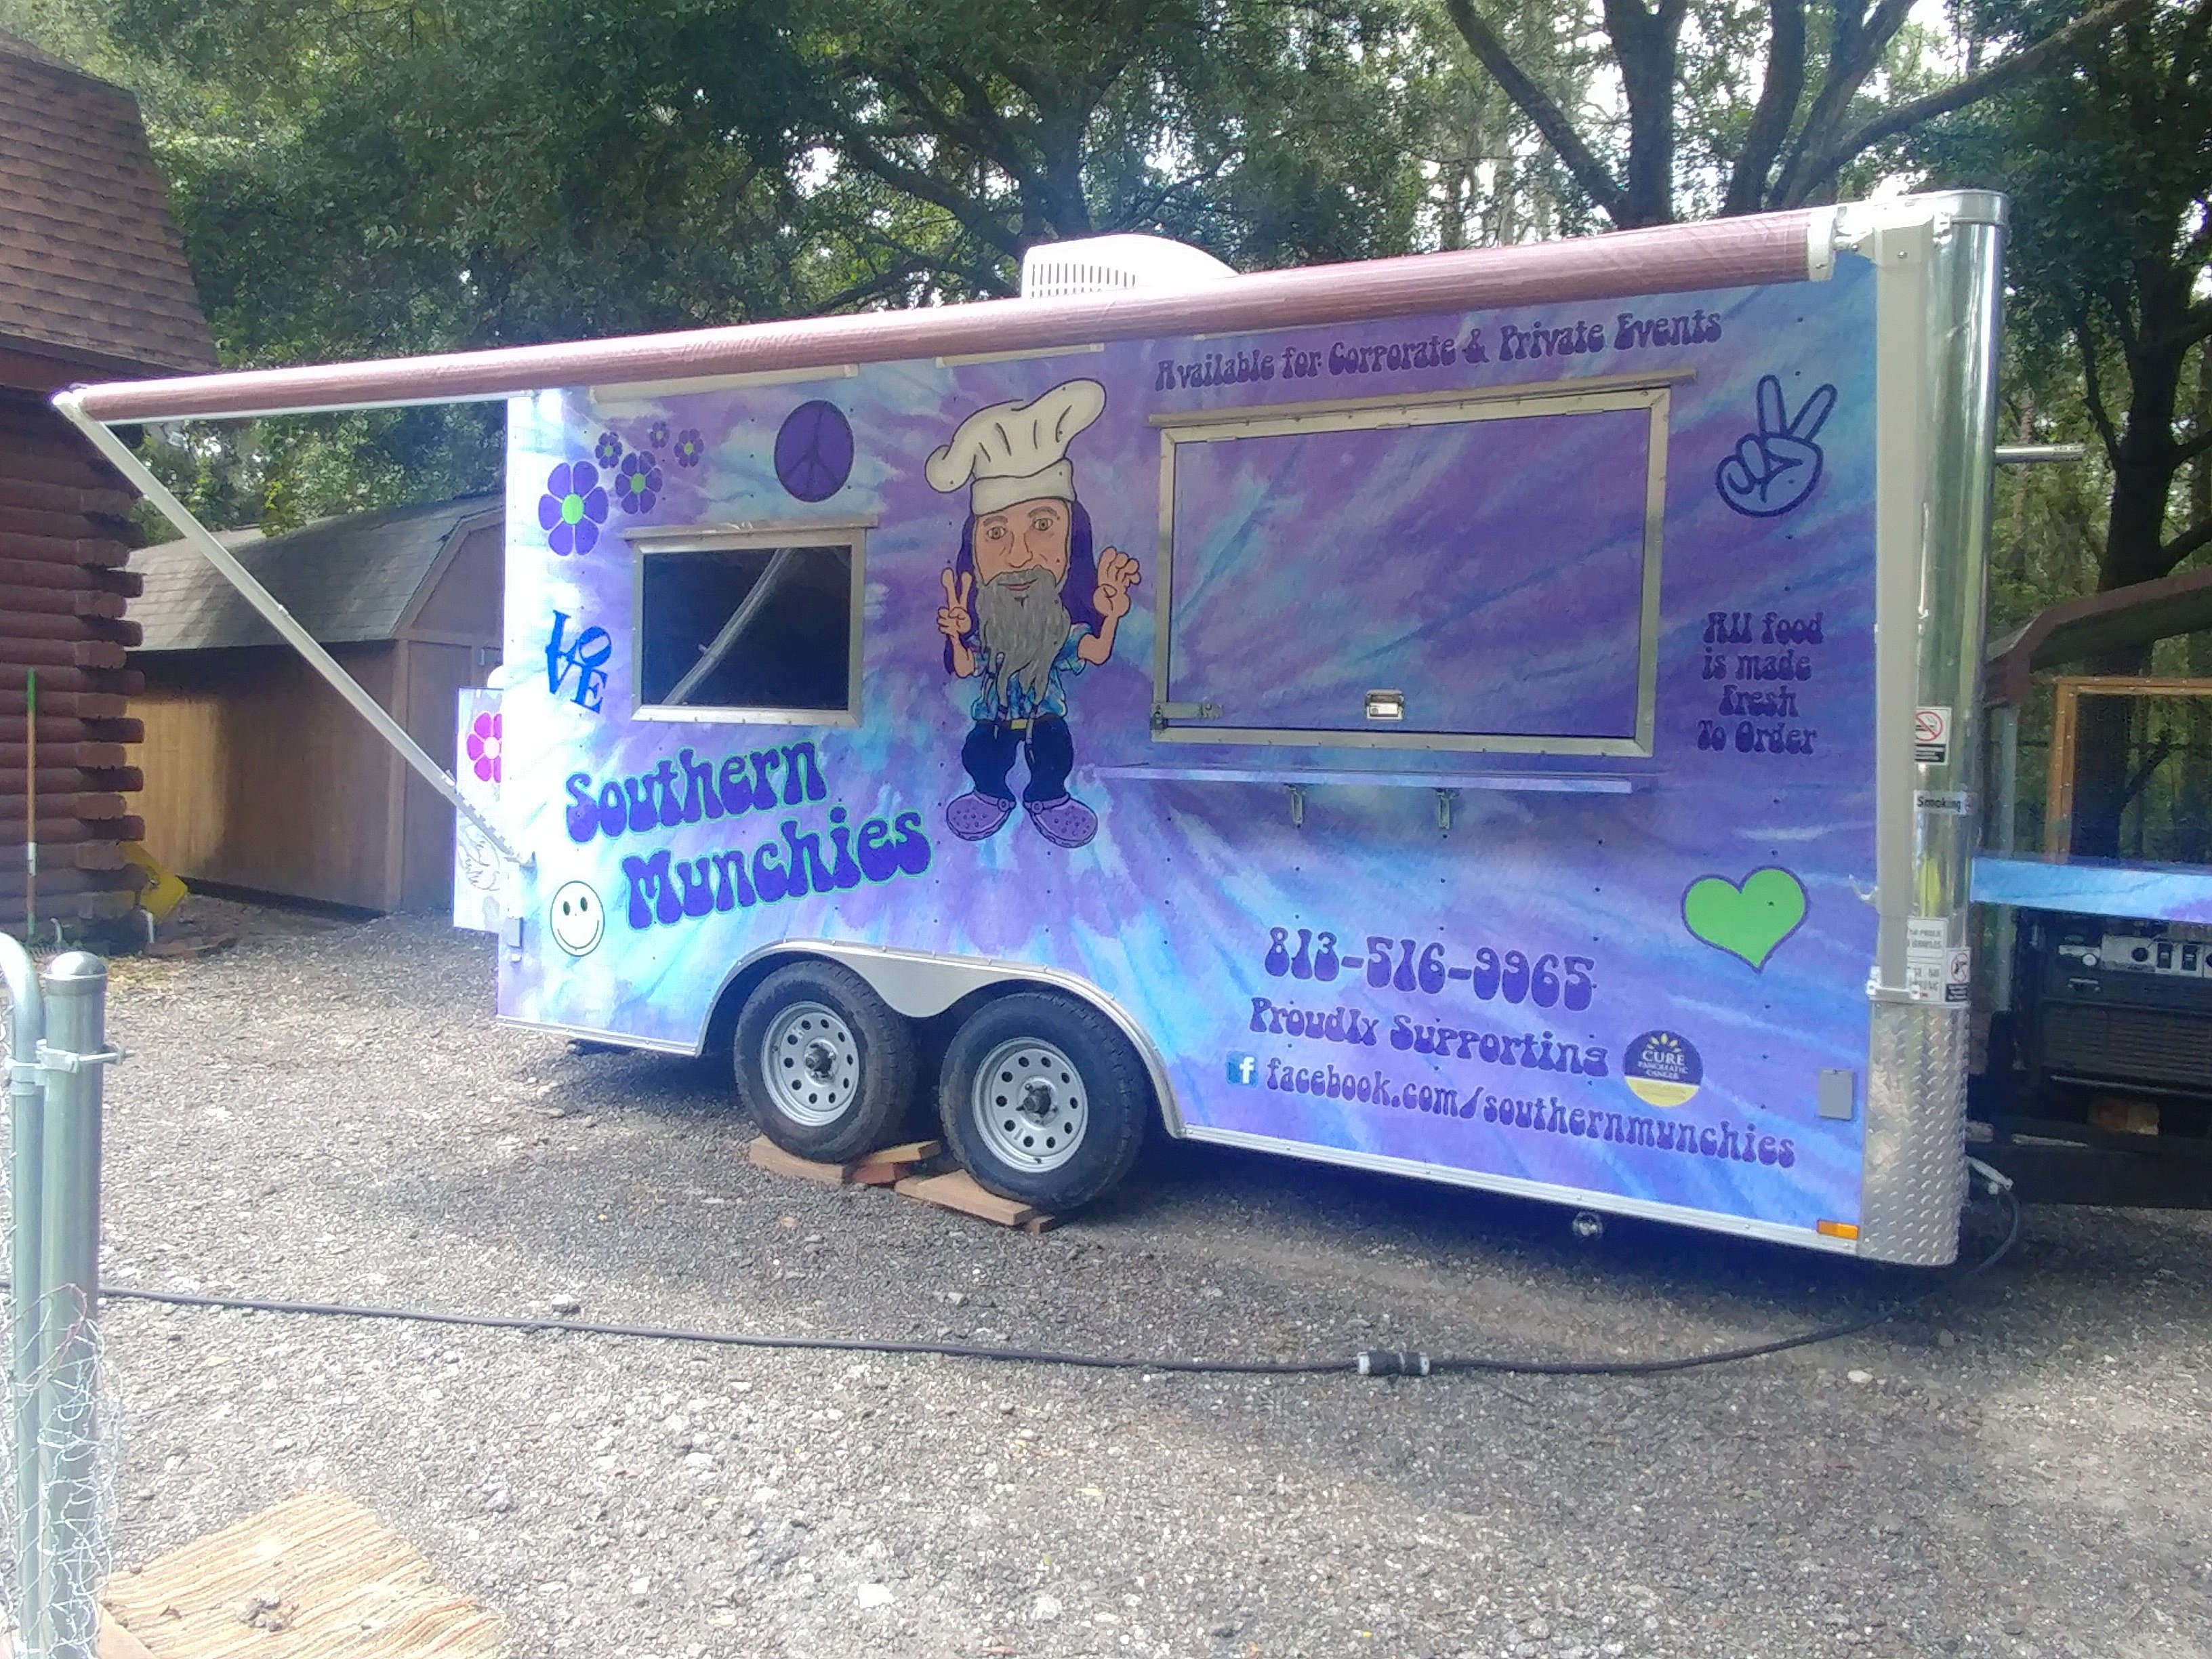 Southern Munchies Food Trailer